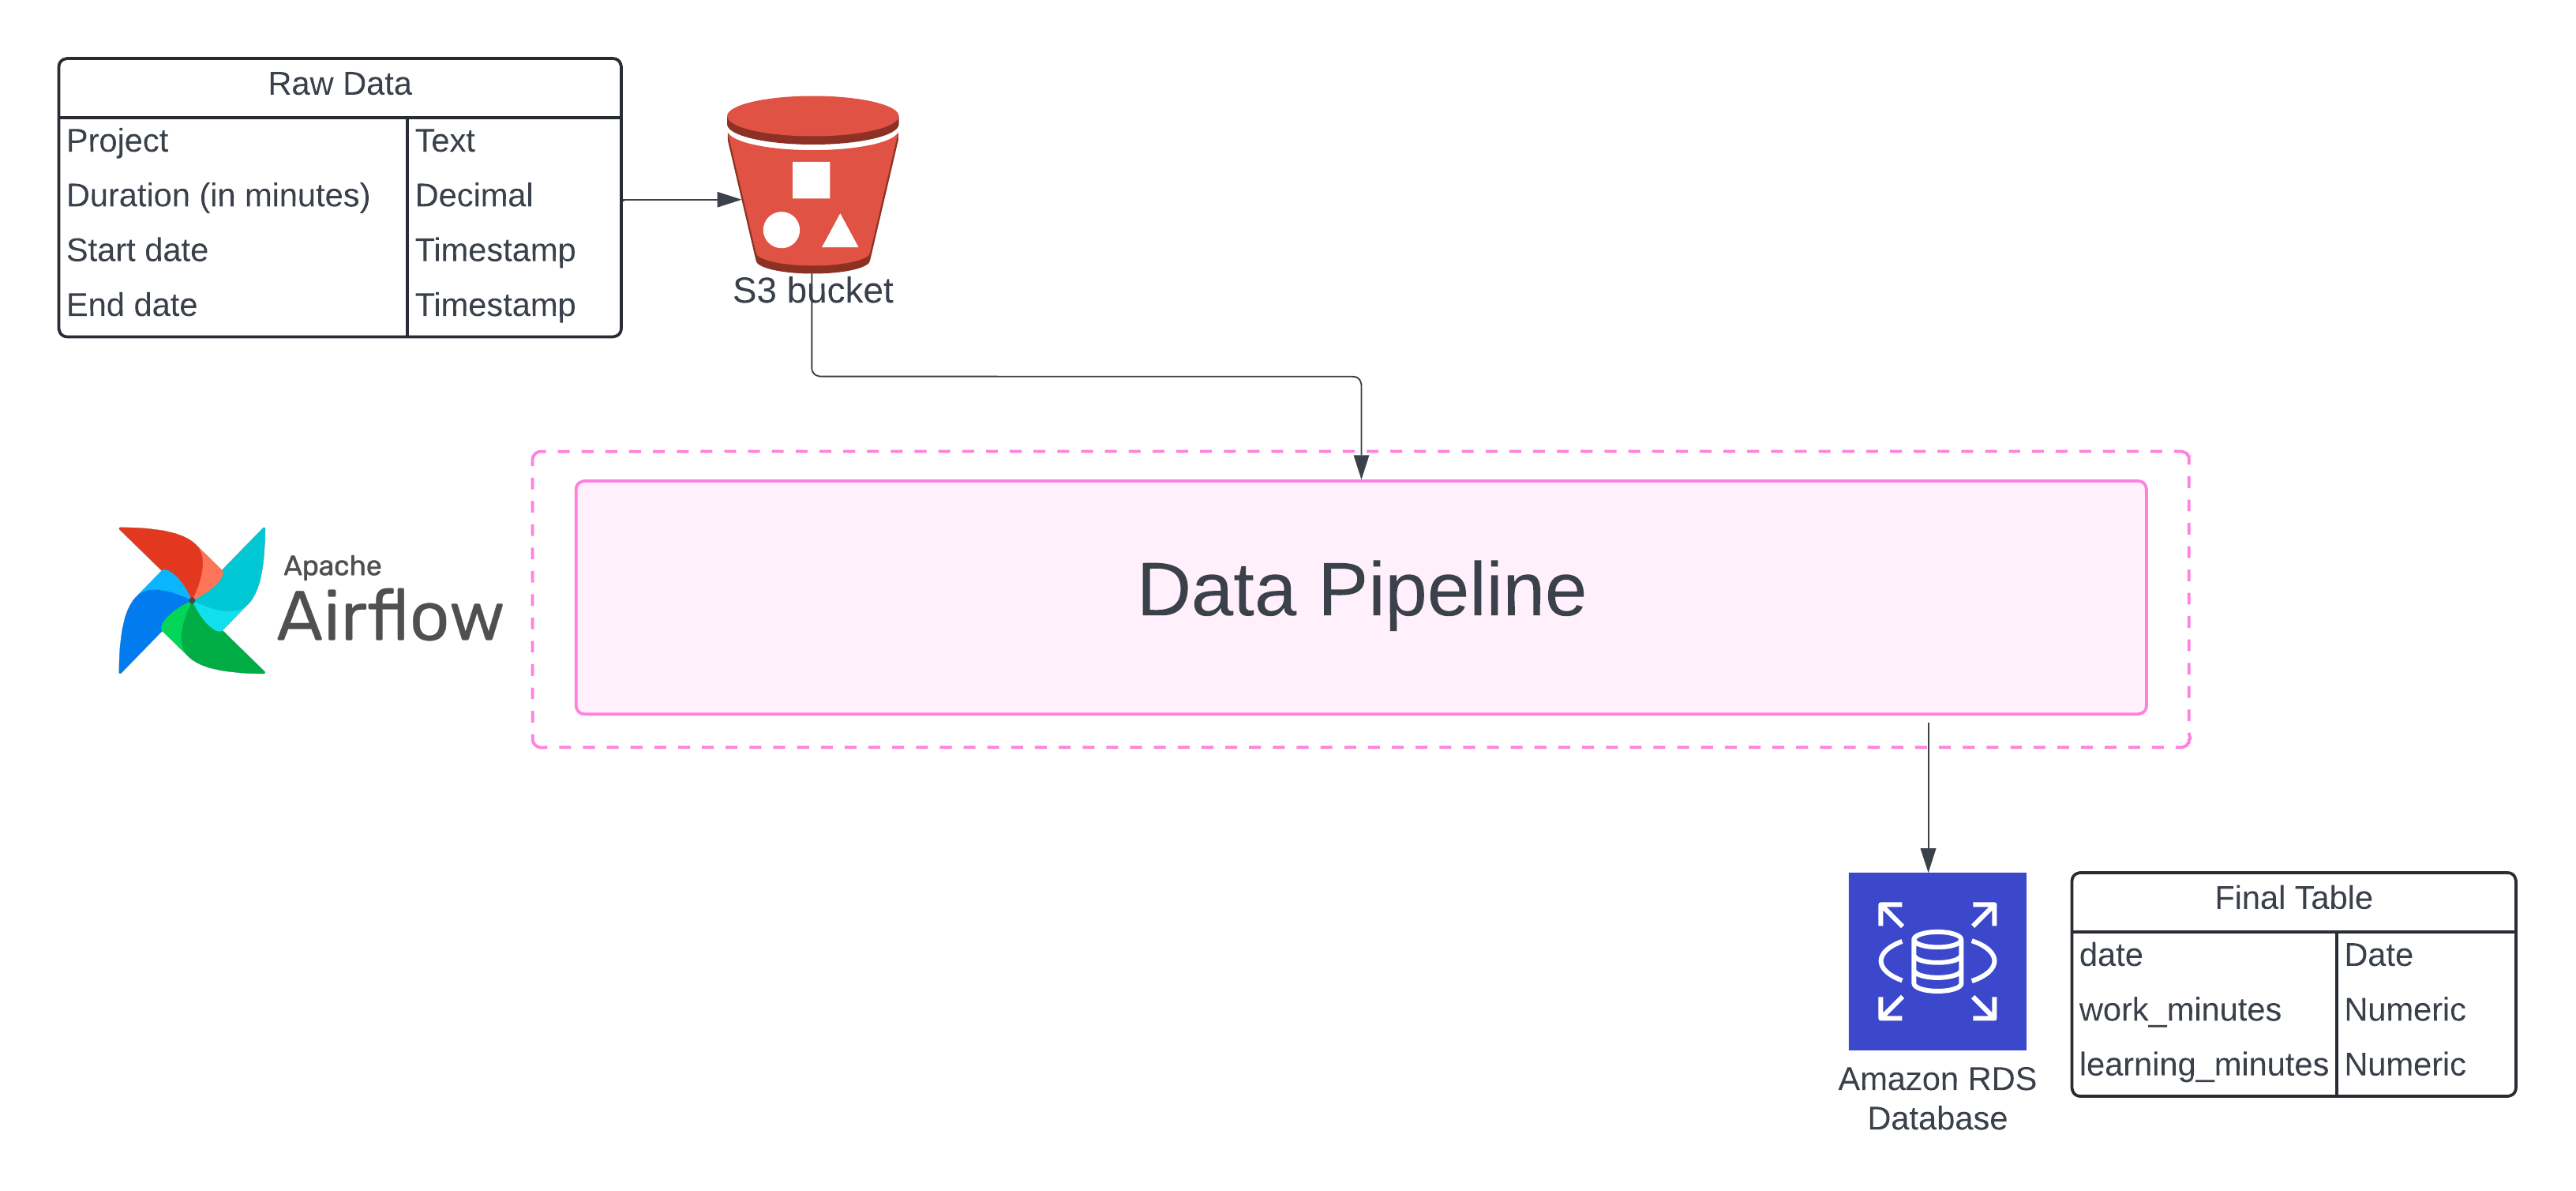 A LucidChart  diagram of a data pipeline using Apache Airflow, showing the flow from raw data with columns like project, duration, start and end dates, through an S3 bucket, processed by a data pipeline, to a final table in an Amazon RDS Database with columns like date, work_minutes, and learning_minutes.